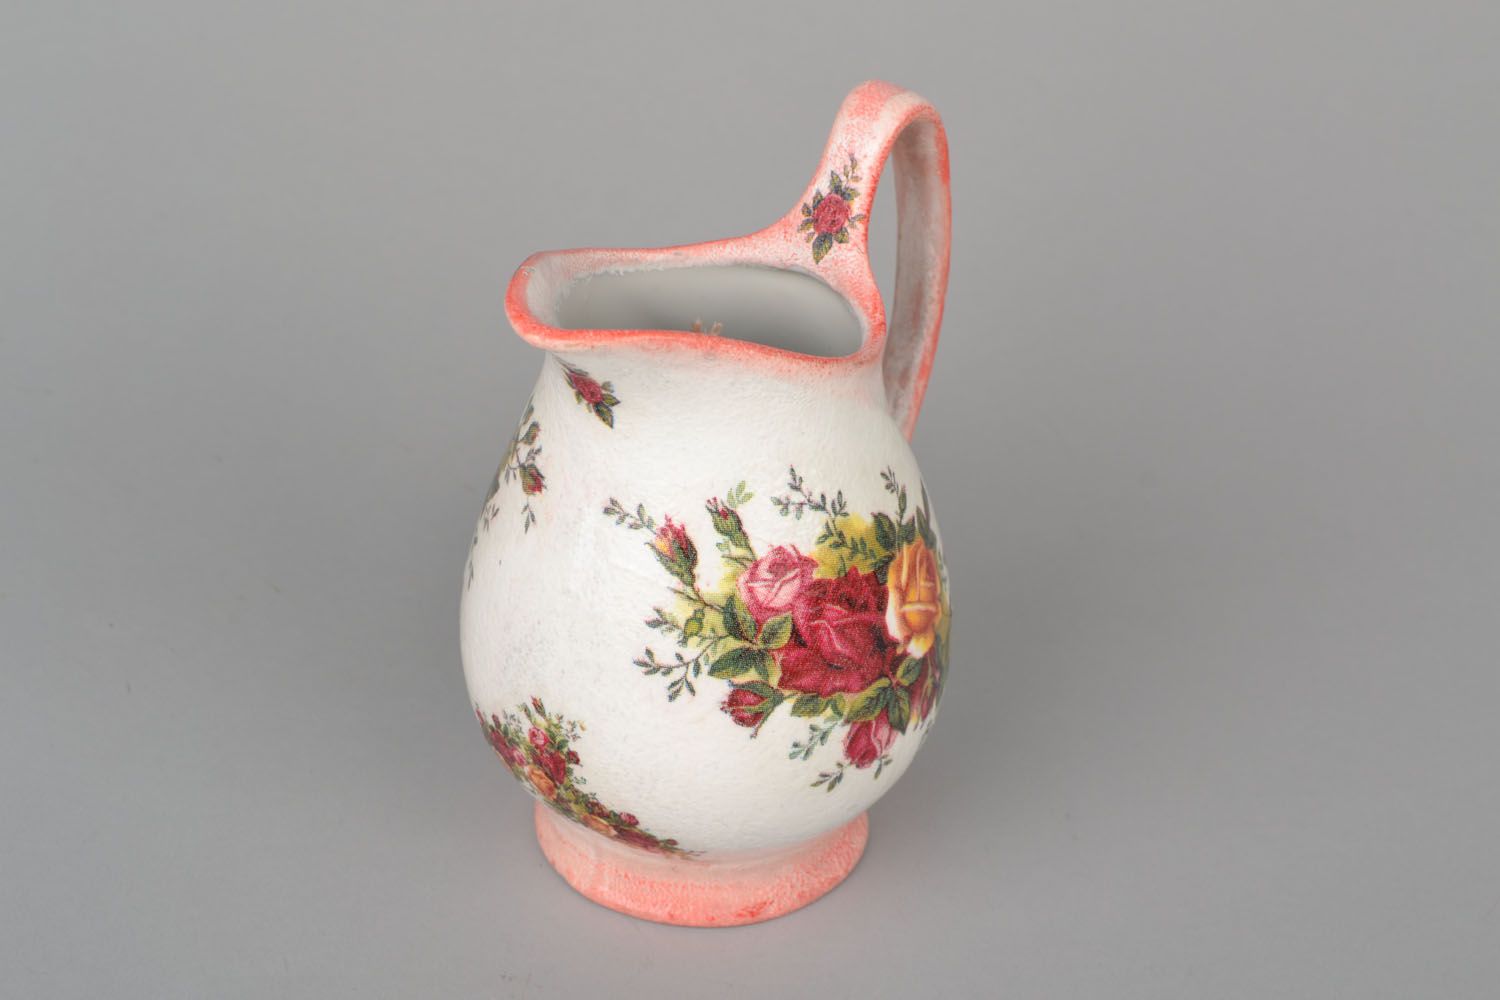 20 oz ceramic water pitcher in floral style in white and rose colors 0,54 lb photo 4